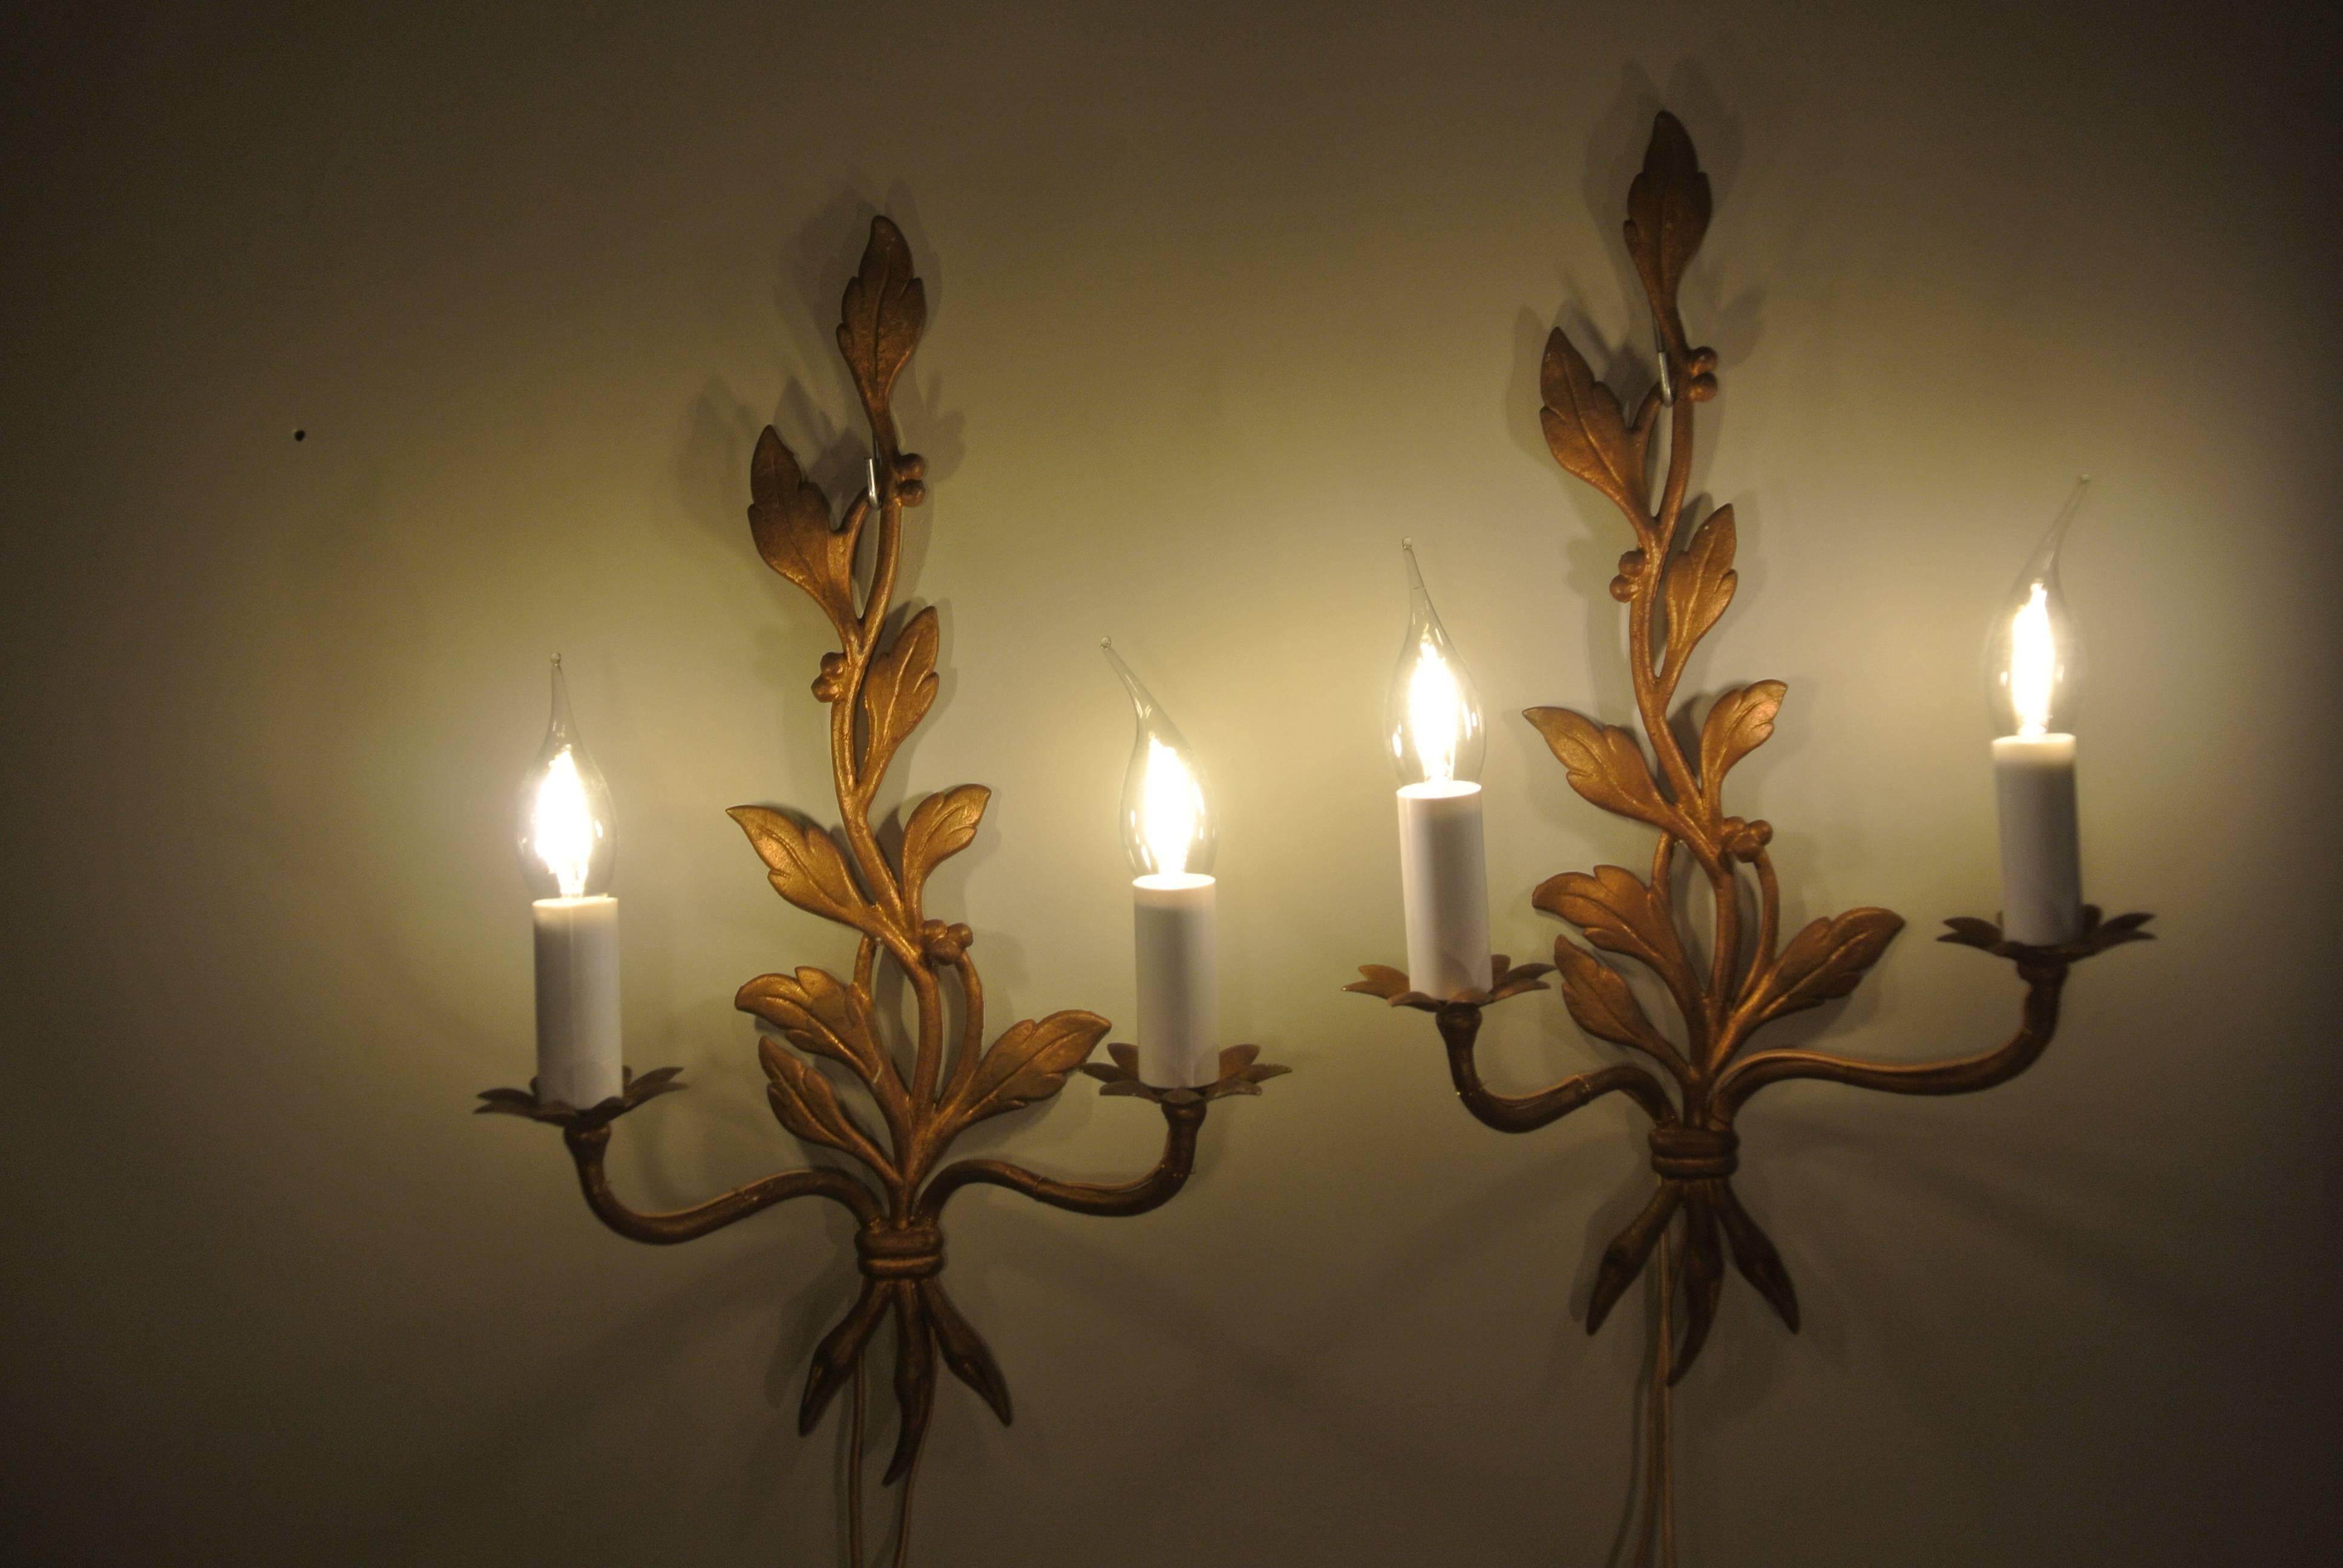 Pair of Mid-Century Modern Gold Gilt Bronze Sconces in a Leaf Design, circa 1960 For Sale 4